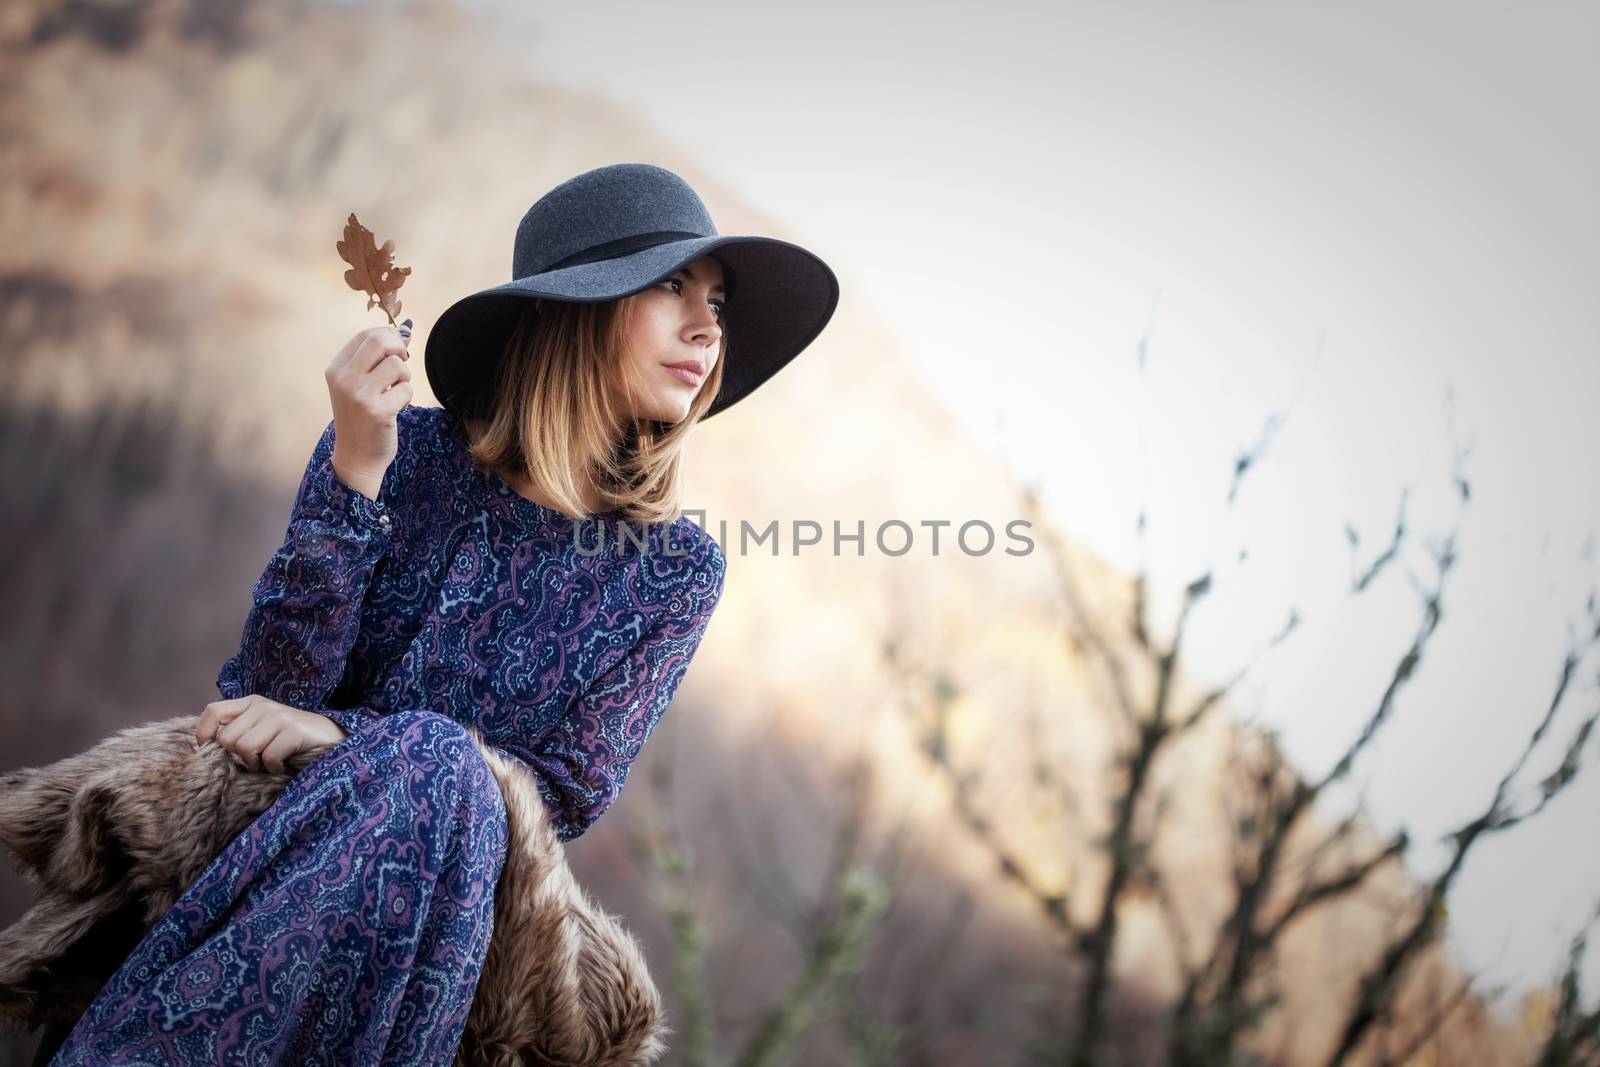 pretty young woman holding a leaf in nature, vintage style outfit